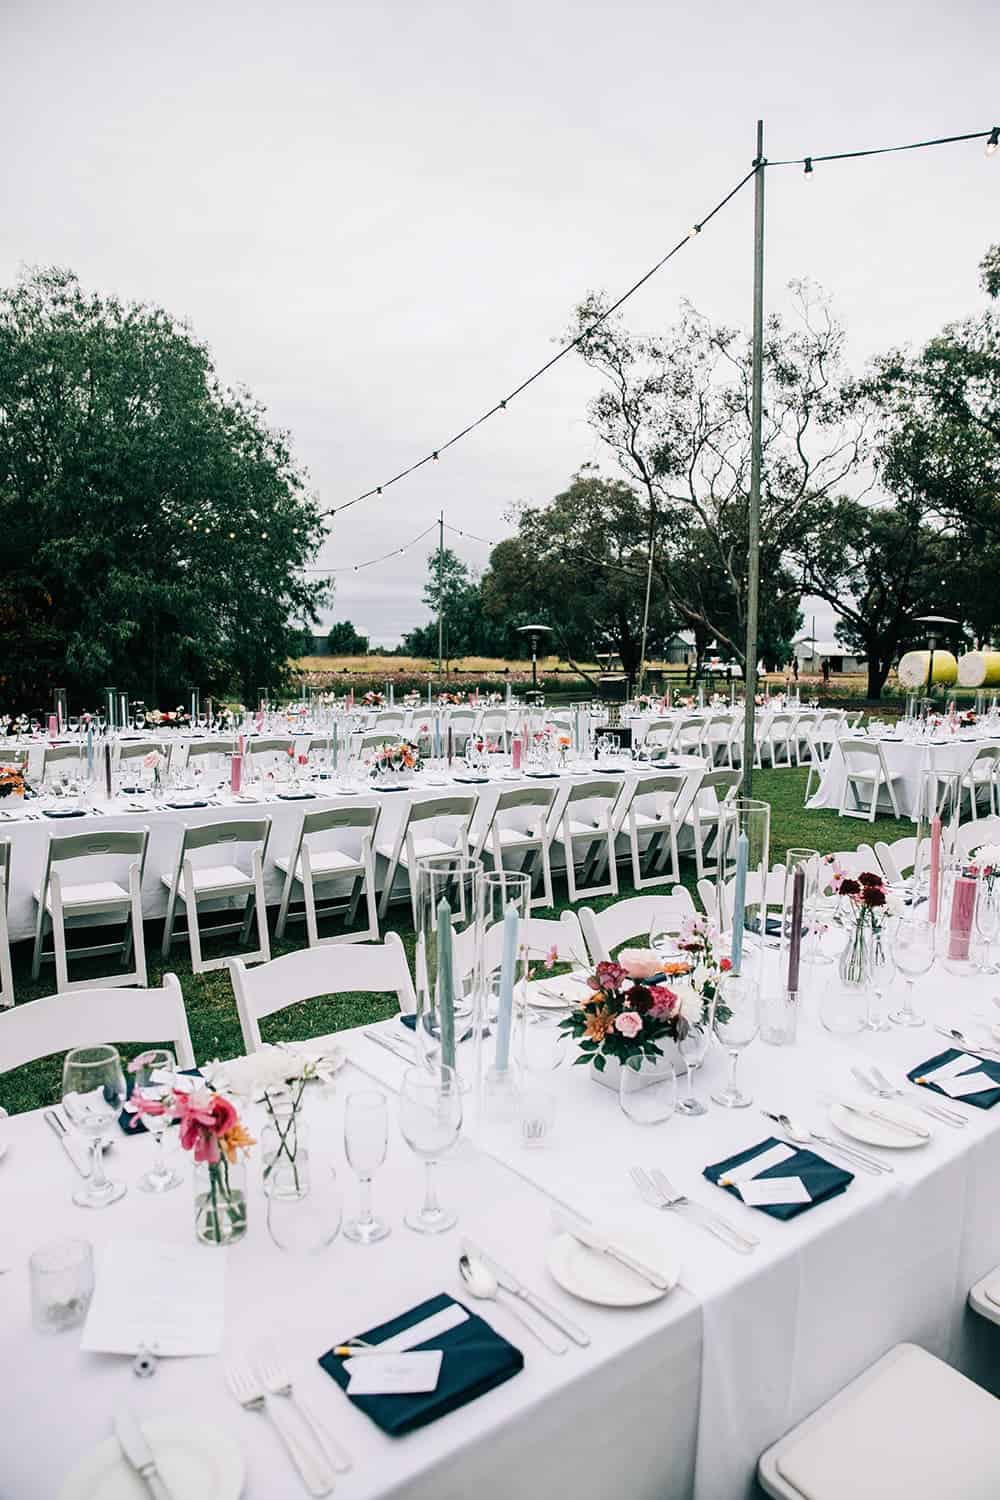 Long tables set up for wedding outside on grass with lanterns hanging above